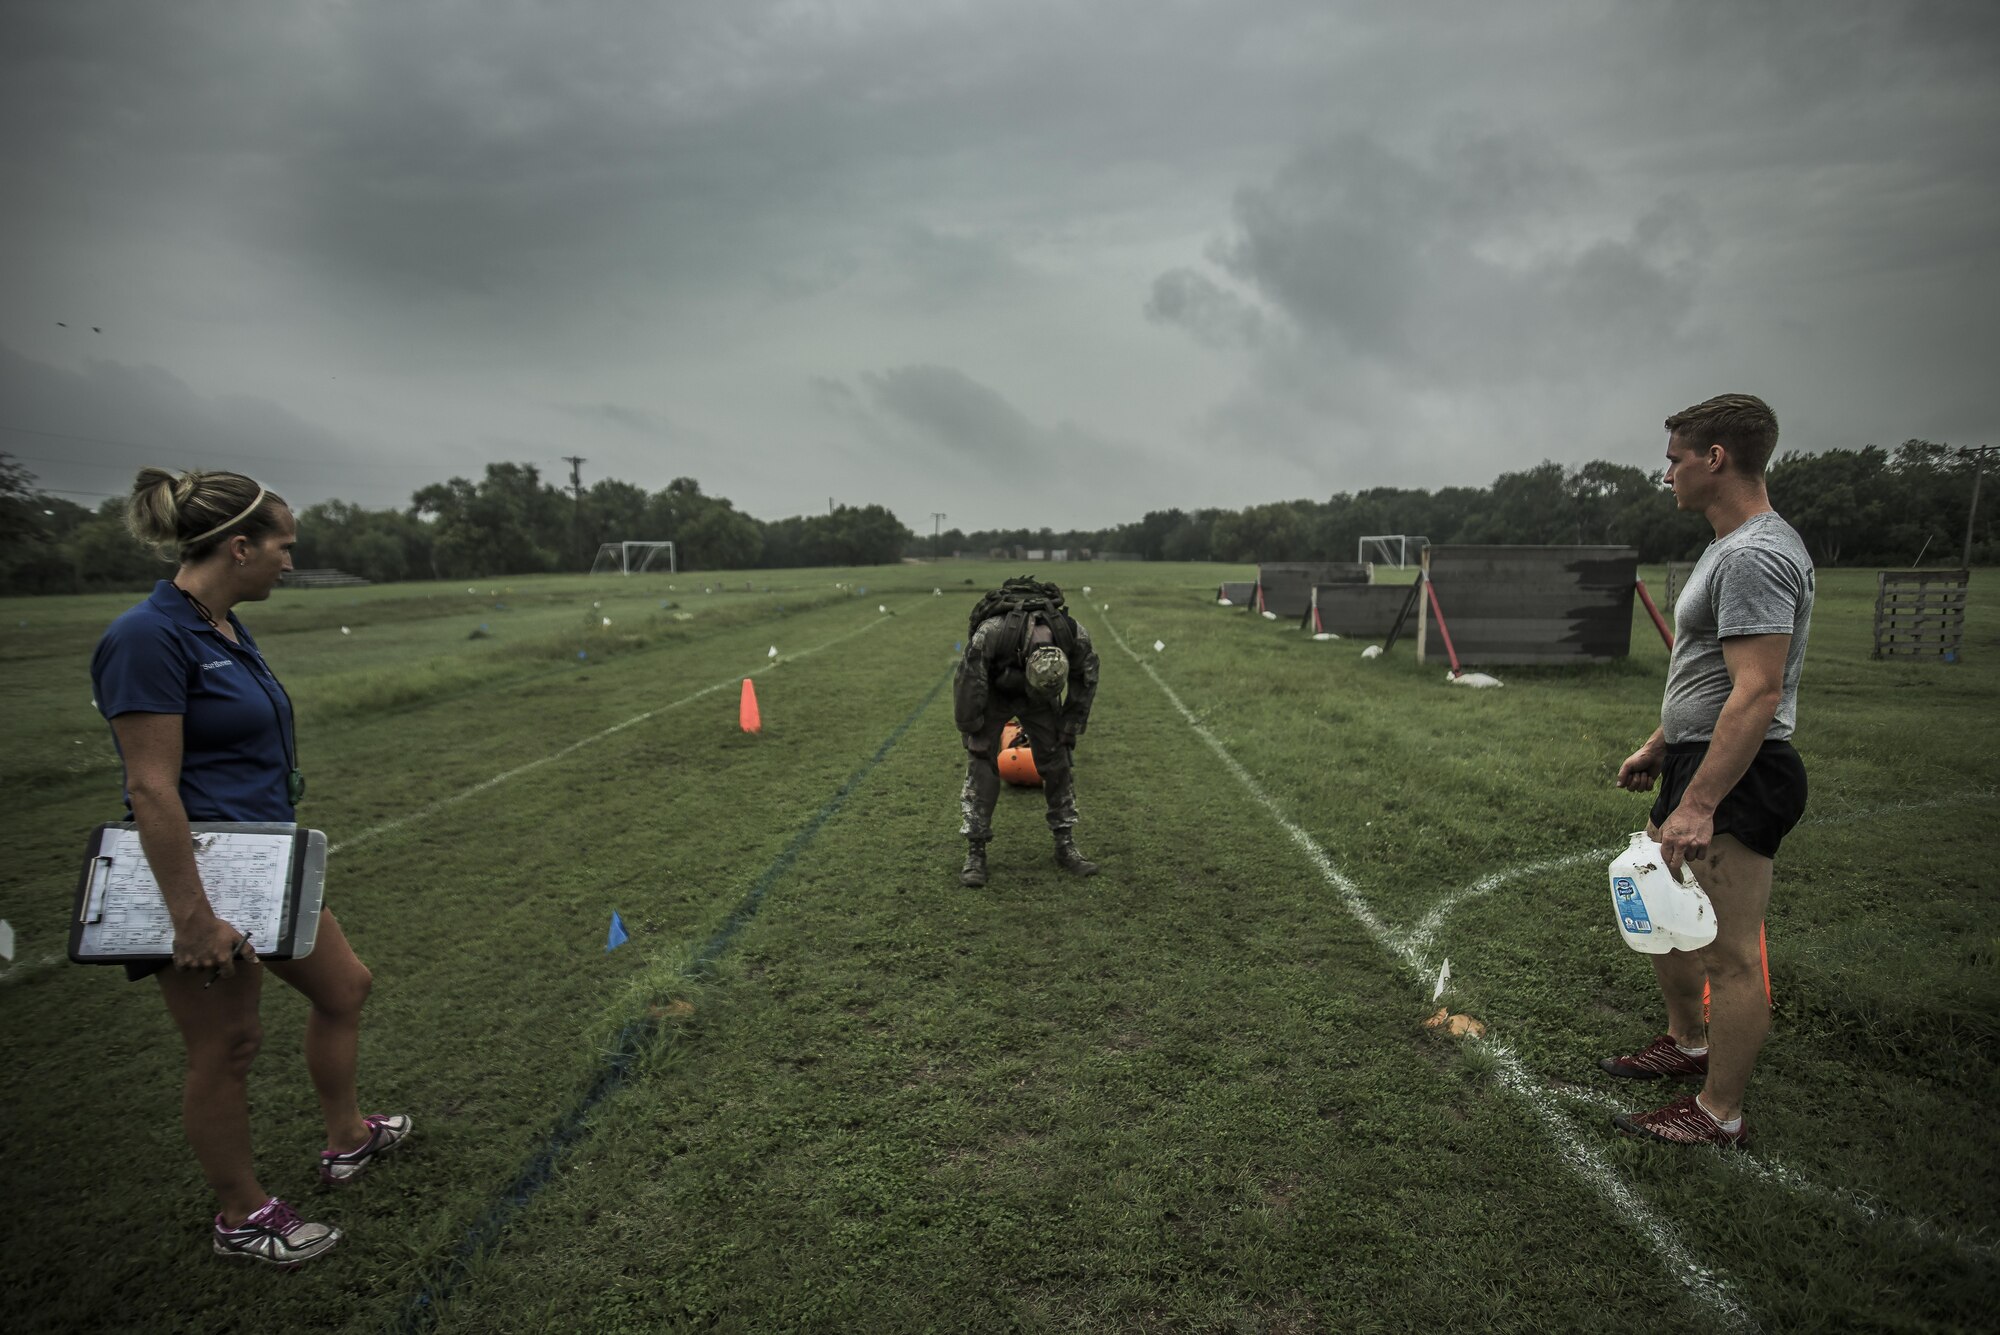 An Airman completes an obstacle course while wearing a 20-pound vest and a 50-pound rucksack, June 19, 2015, as researchers from the Air Force Fitness Testing and Standards Unit observe. The Airman is a volunteer in the fitness study, which supported the Air Force’s Women in Service Review. The Battlefield Airmen Physical Fitness Study Team developed a prototype PT test that is indicative of the physical capabilities needed for combat. All male and female subjects underwent 39 physical fitness tests and 15 physical task simulations to link fitness tests and standards to real world operational tasks and requirements. (U.S. Air Force photo by Capt. Jose R. Davis)